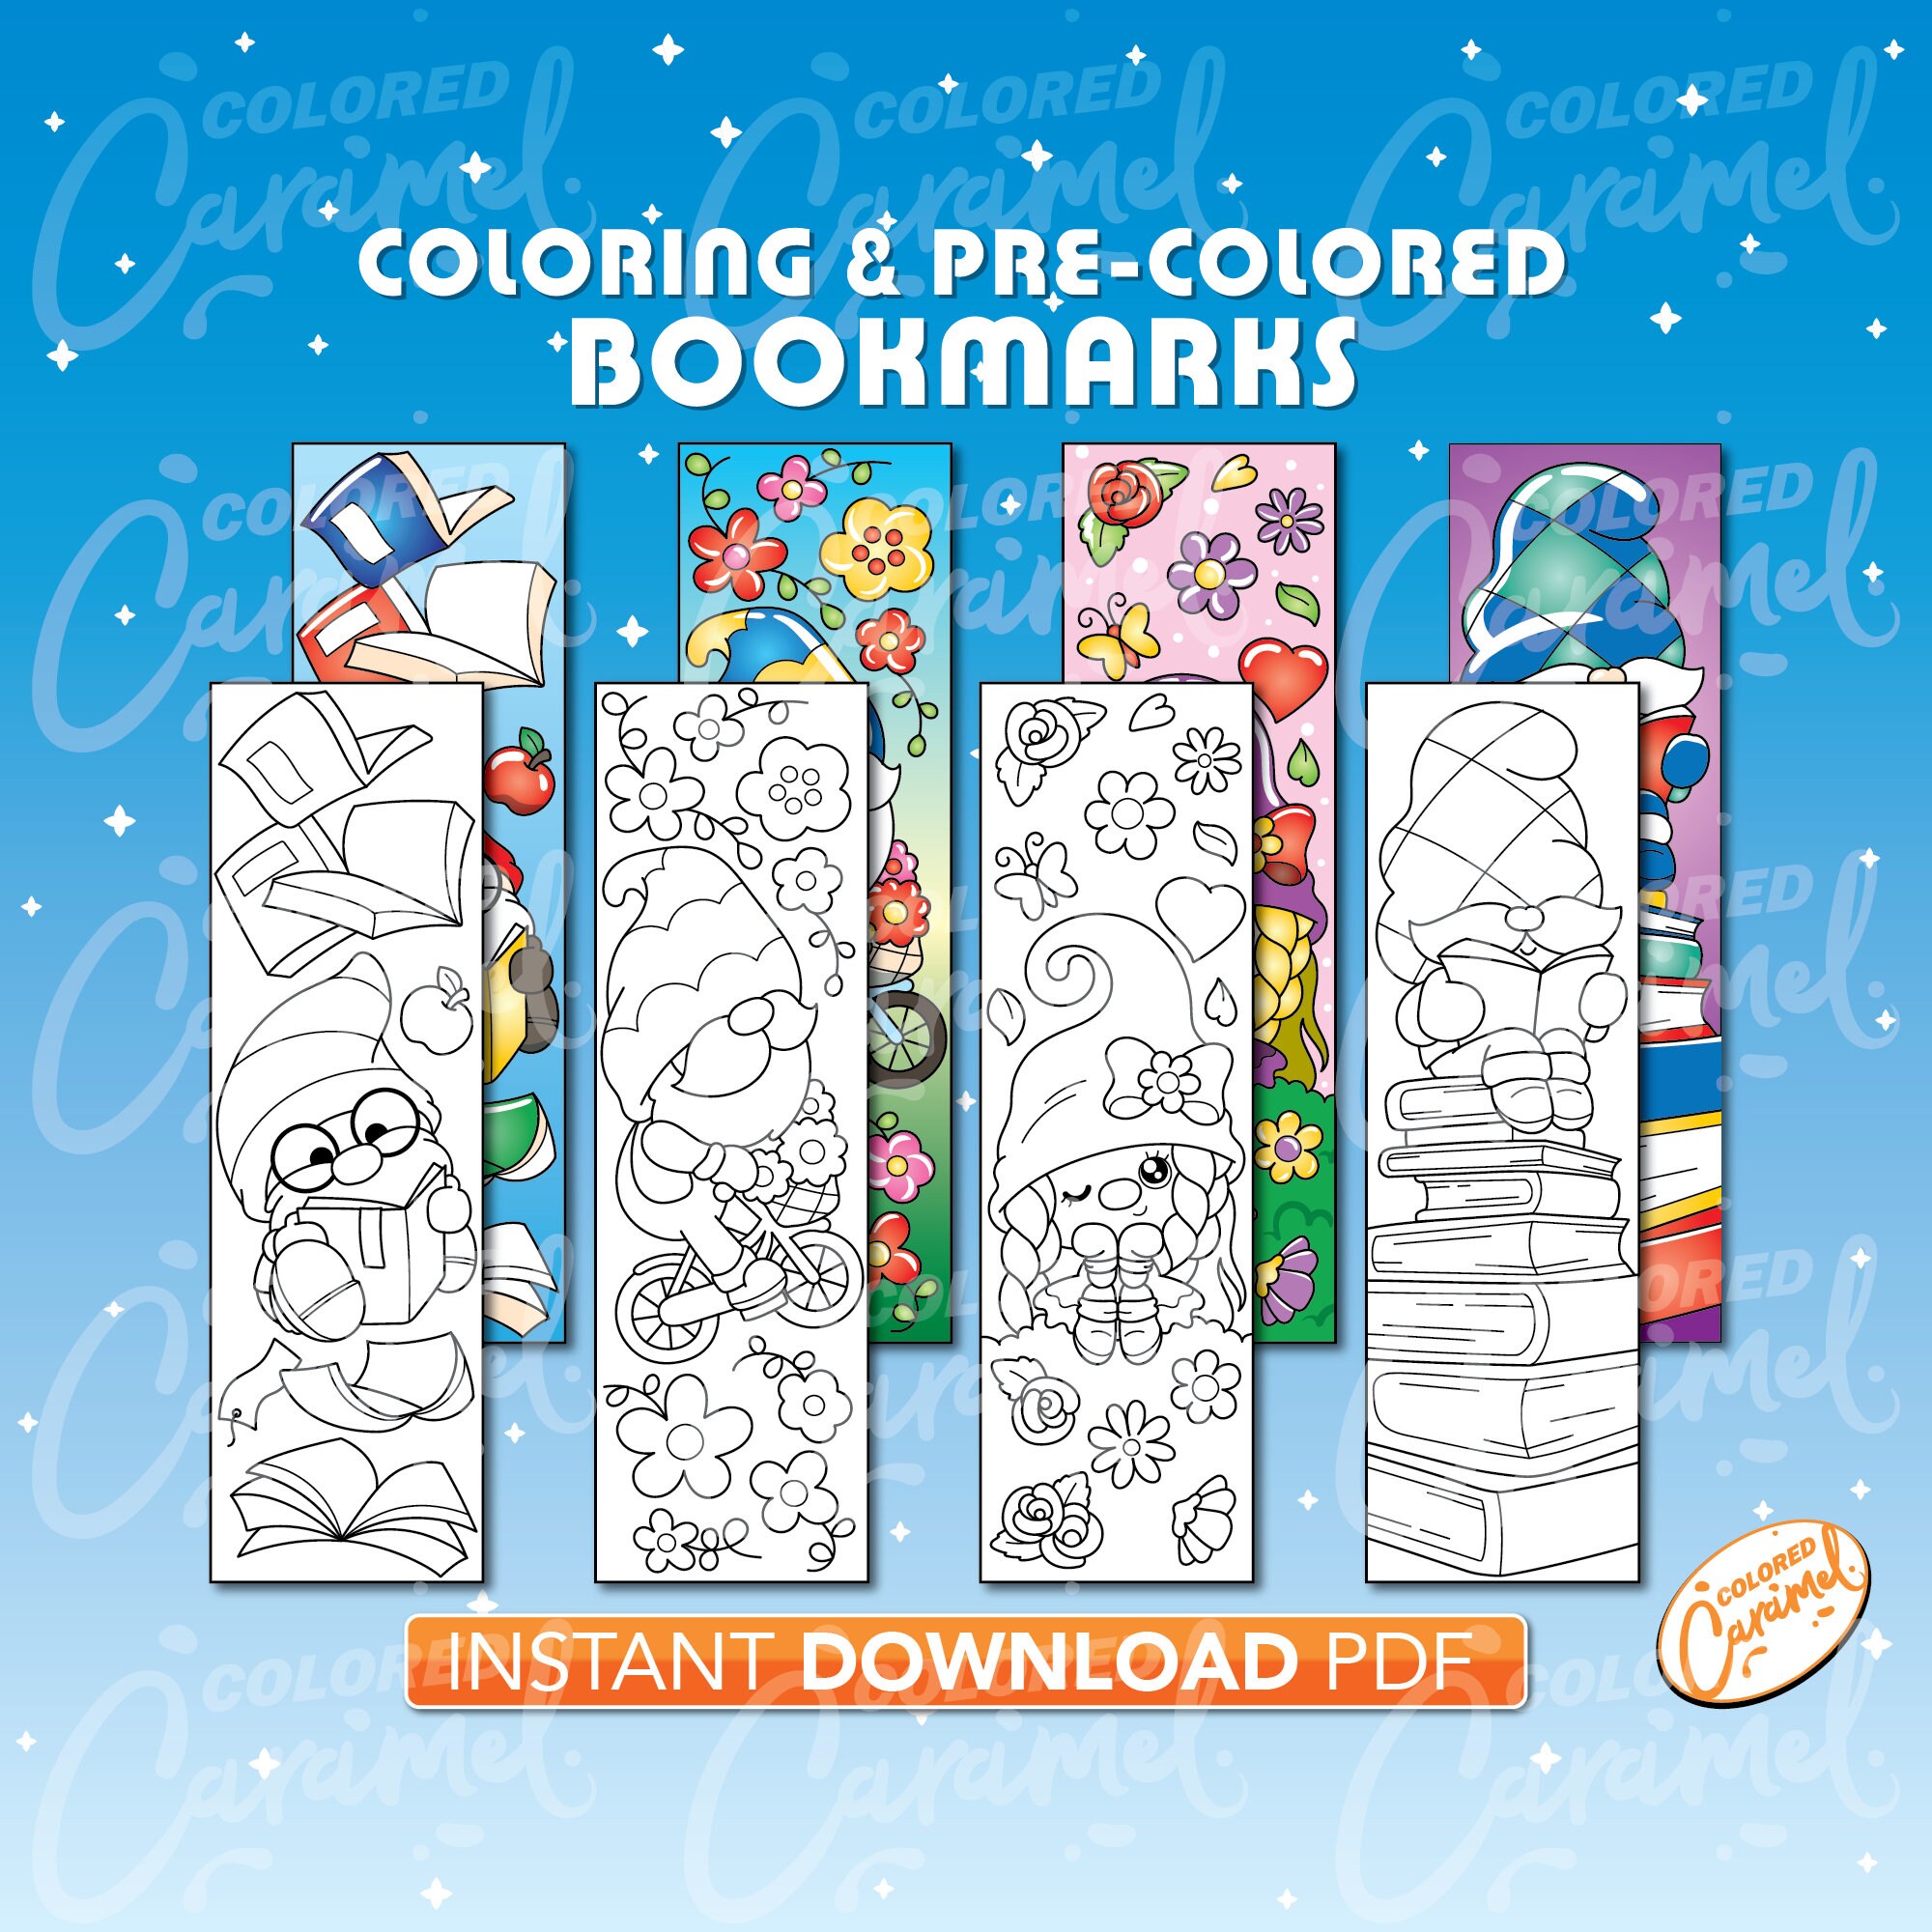 Gnome Coloring Bookmarks, Printables Instant Digital Download PDF, Cute Set of Colorable, Colorful DIY Make Your Own Marker for Books